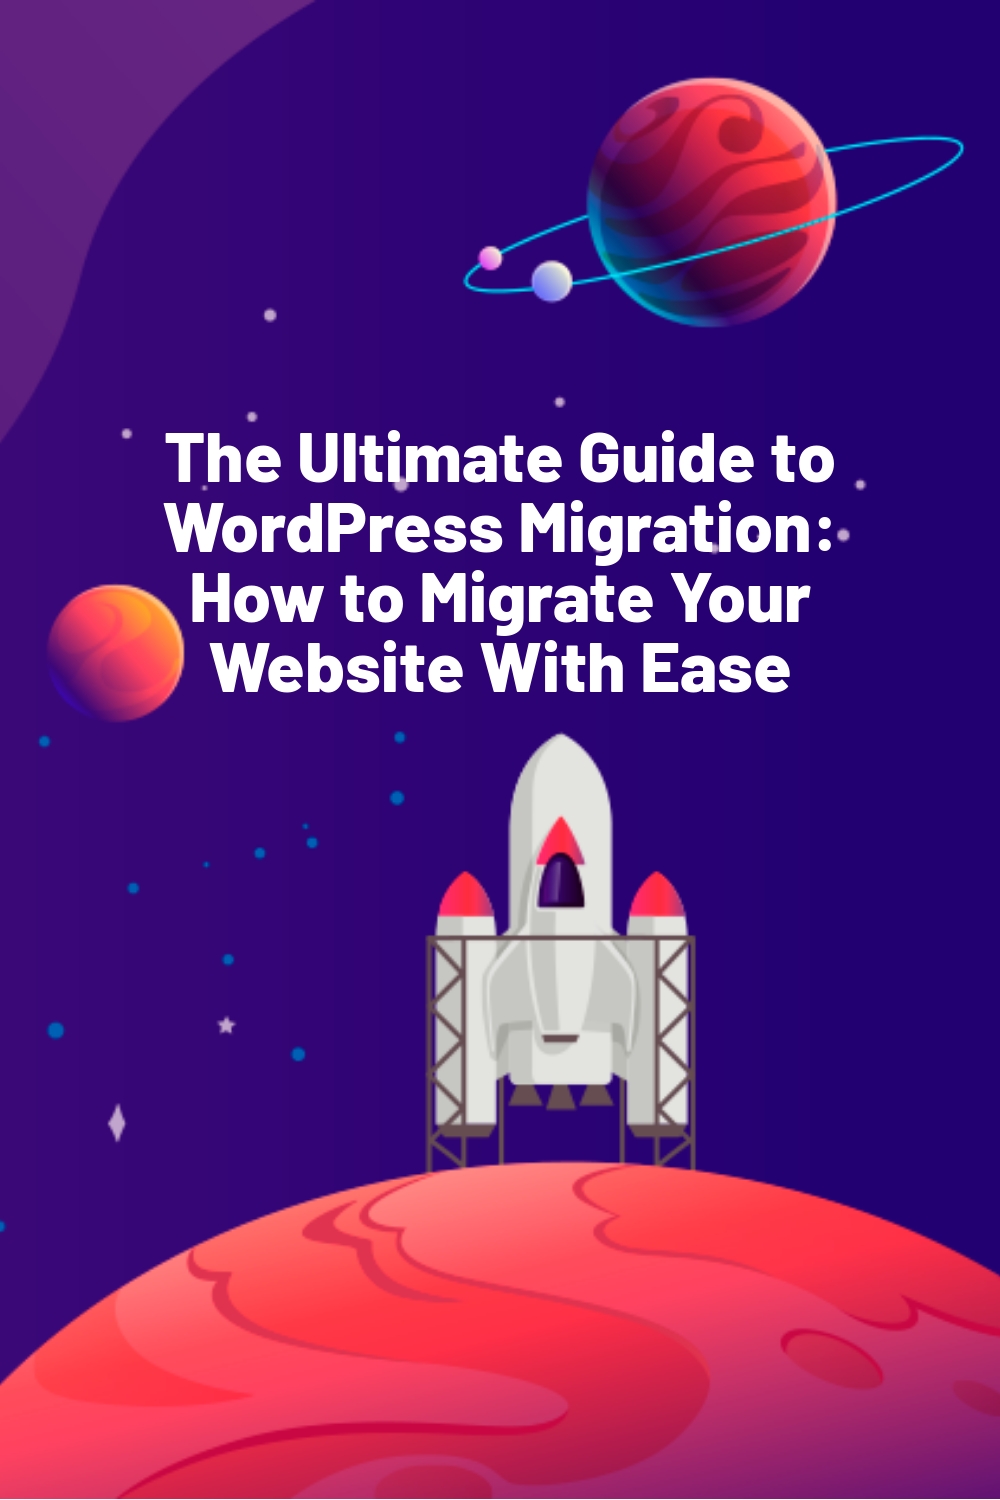 The Ultimate Guide to WordPress Migration: How to Migrate Your Website With Ease